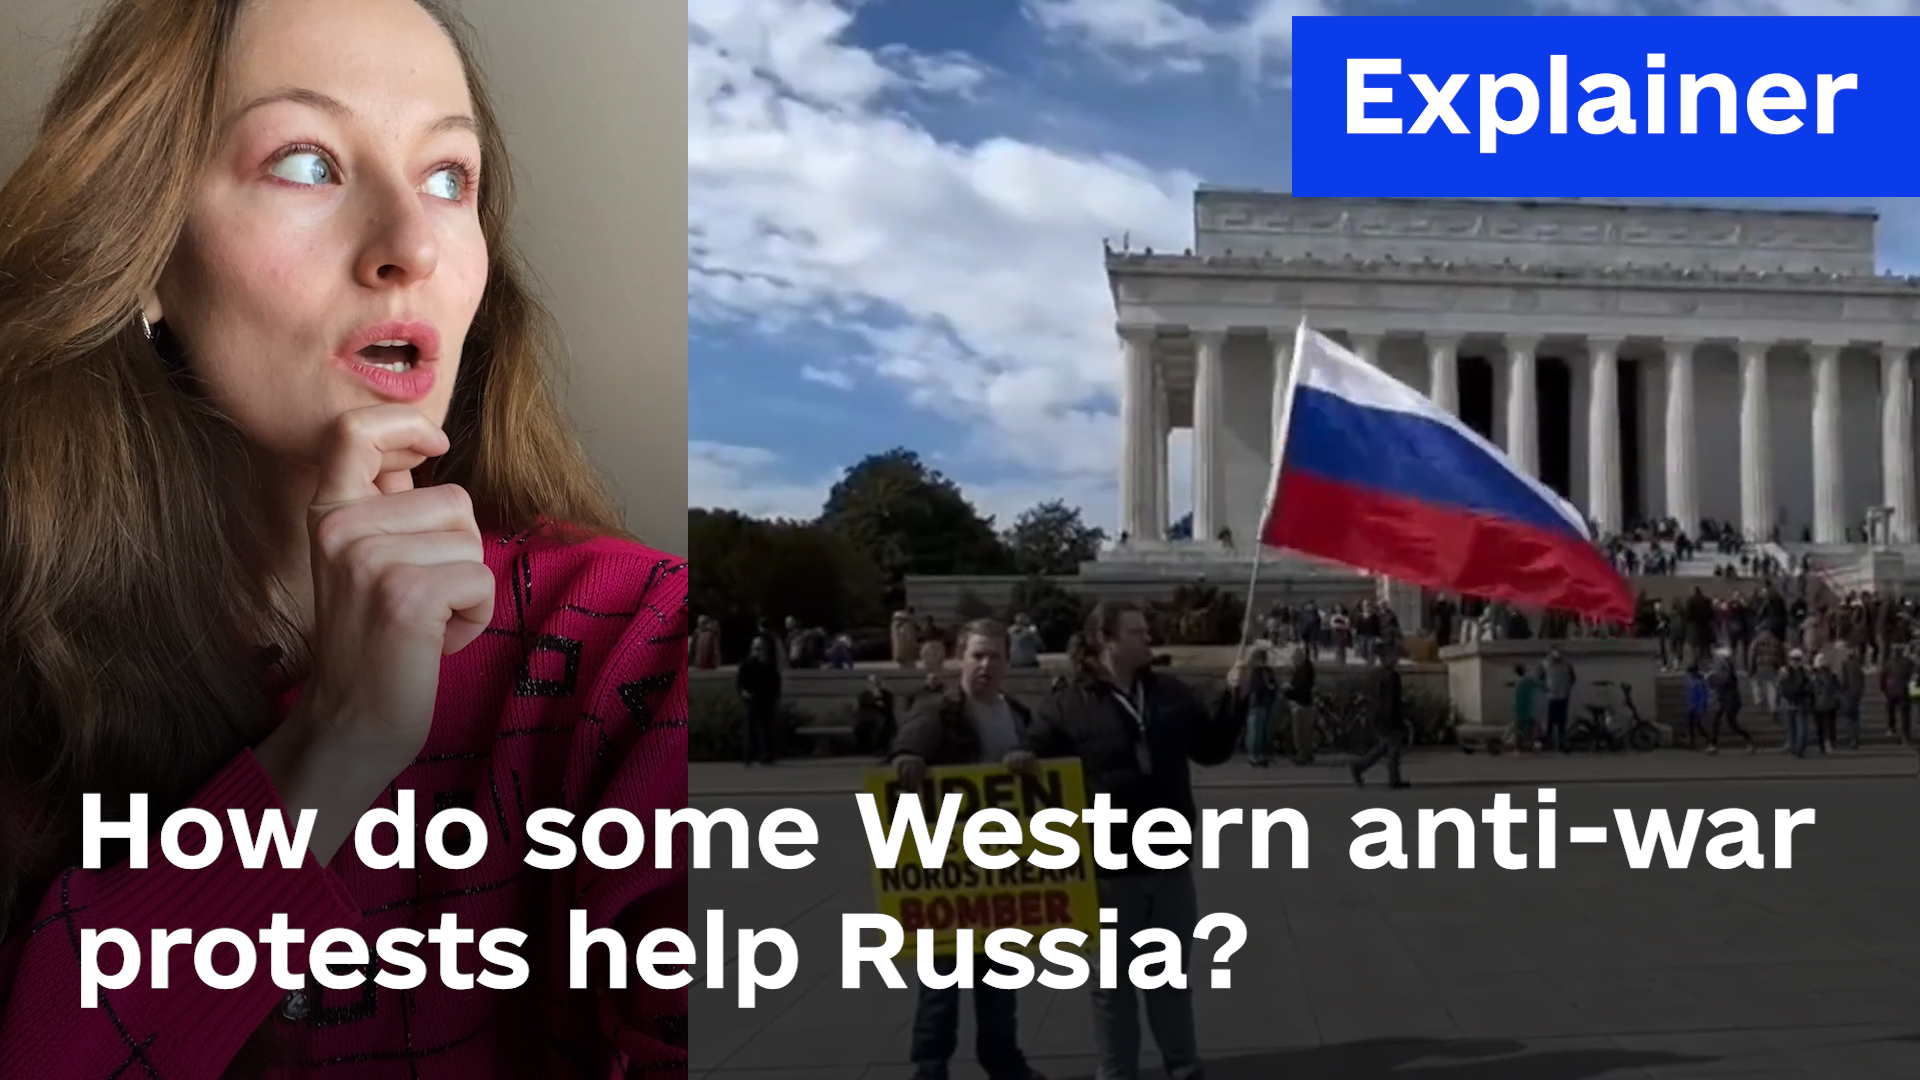 Explainer: How do some Western anti-war protests help Russia?